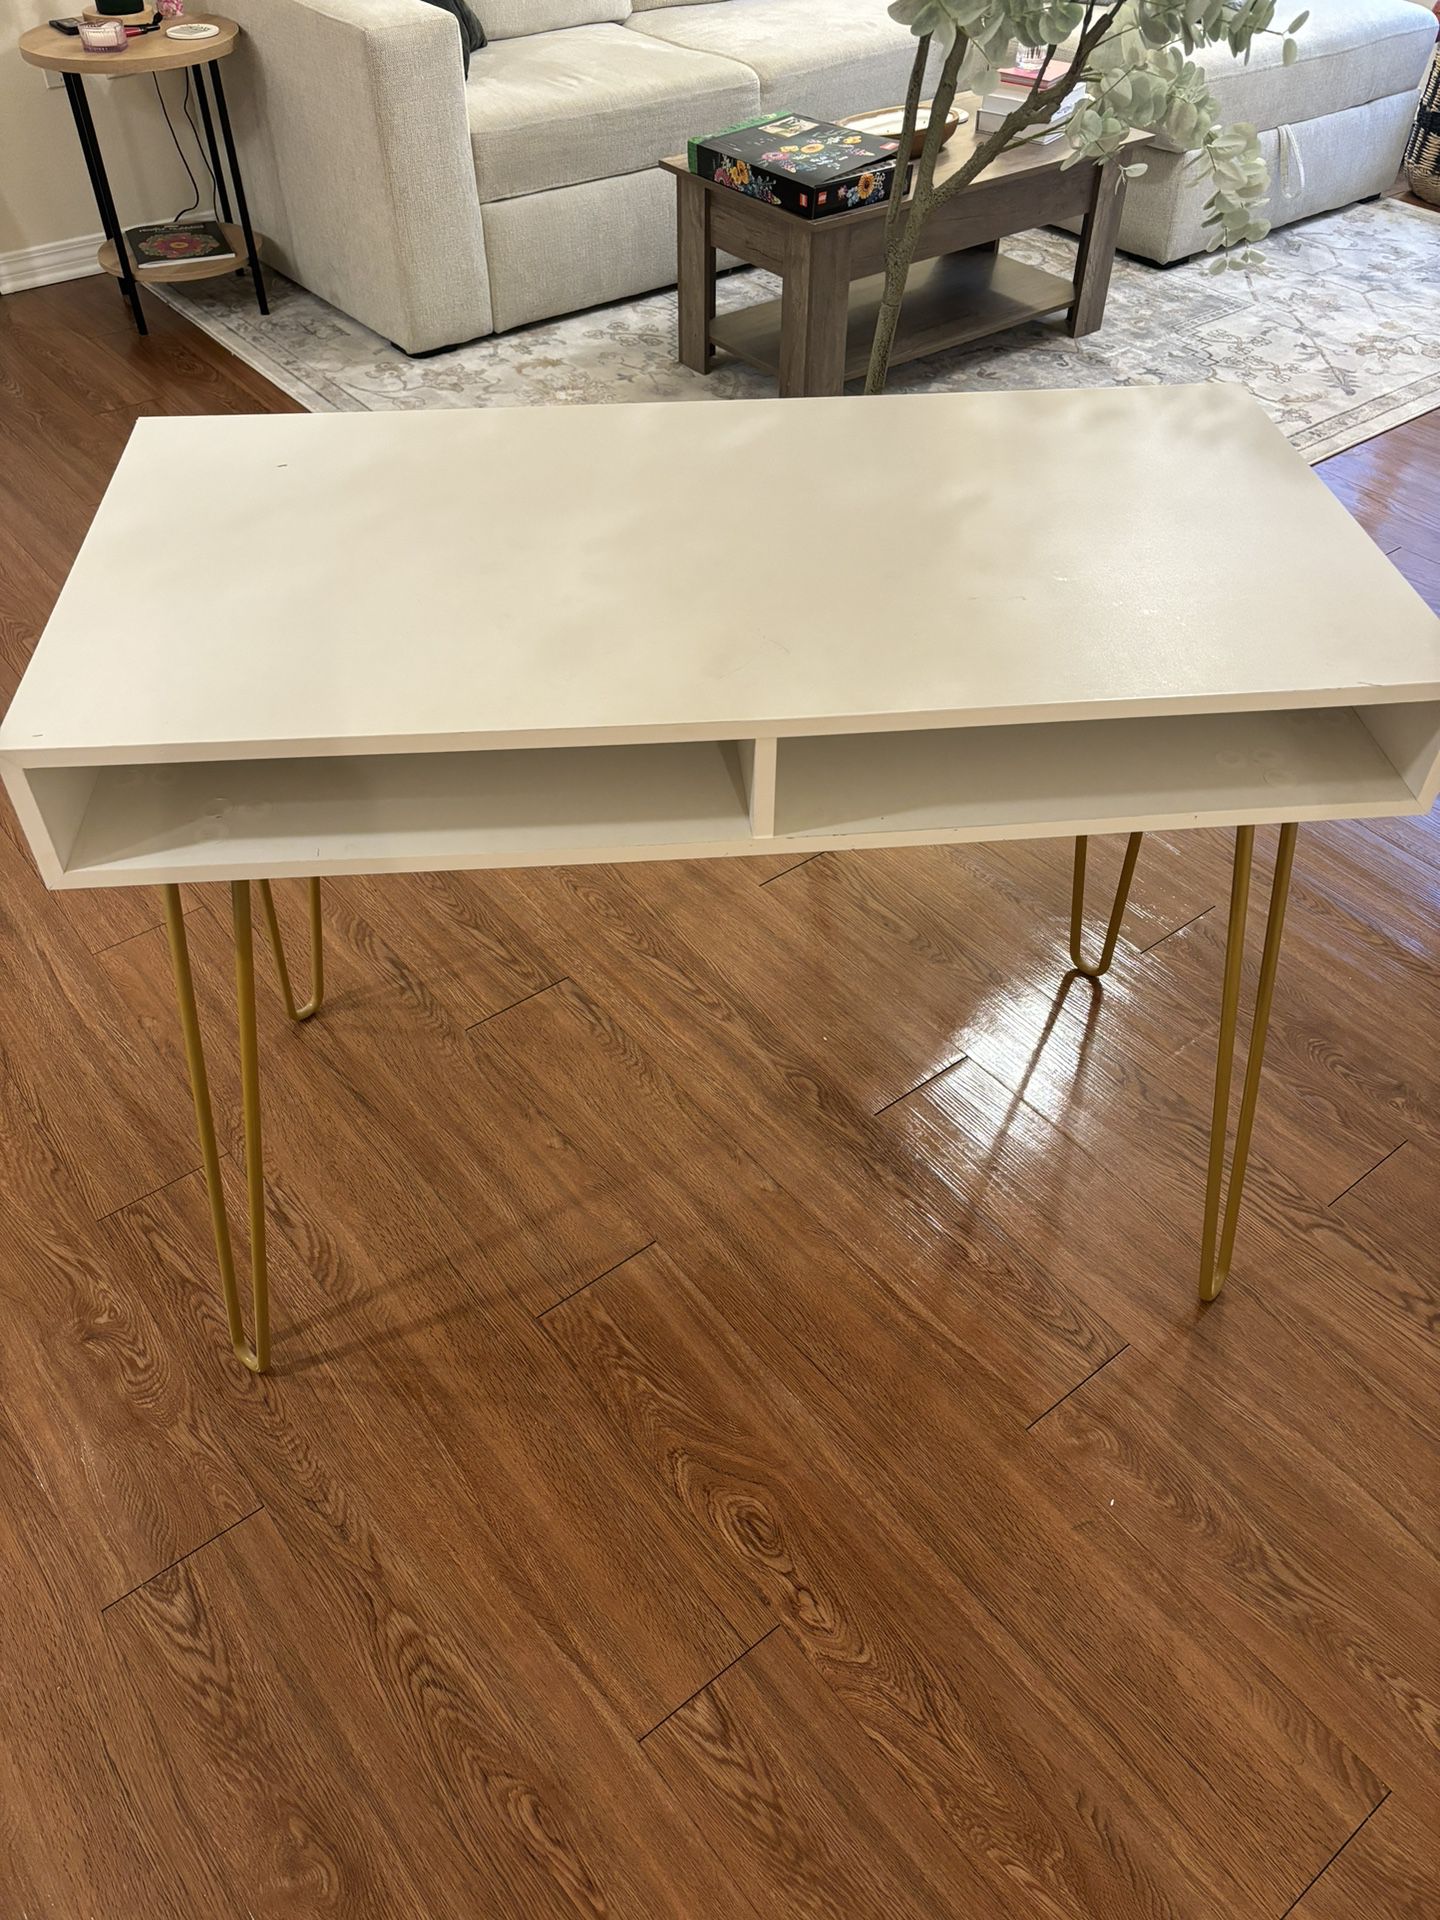 White Hairpin Desk From Target